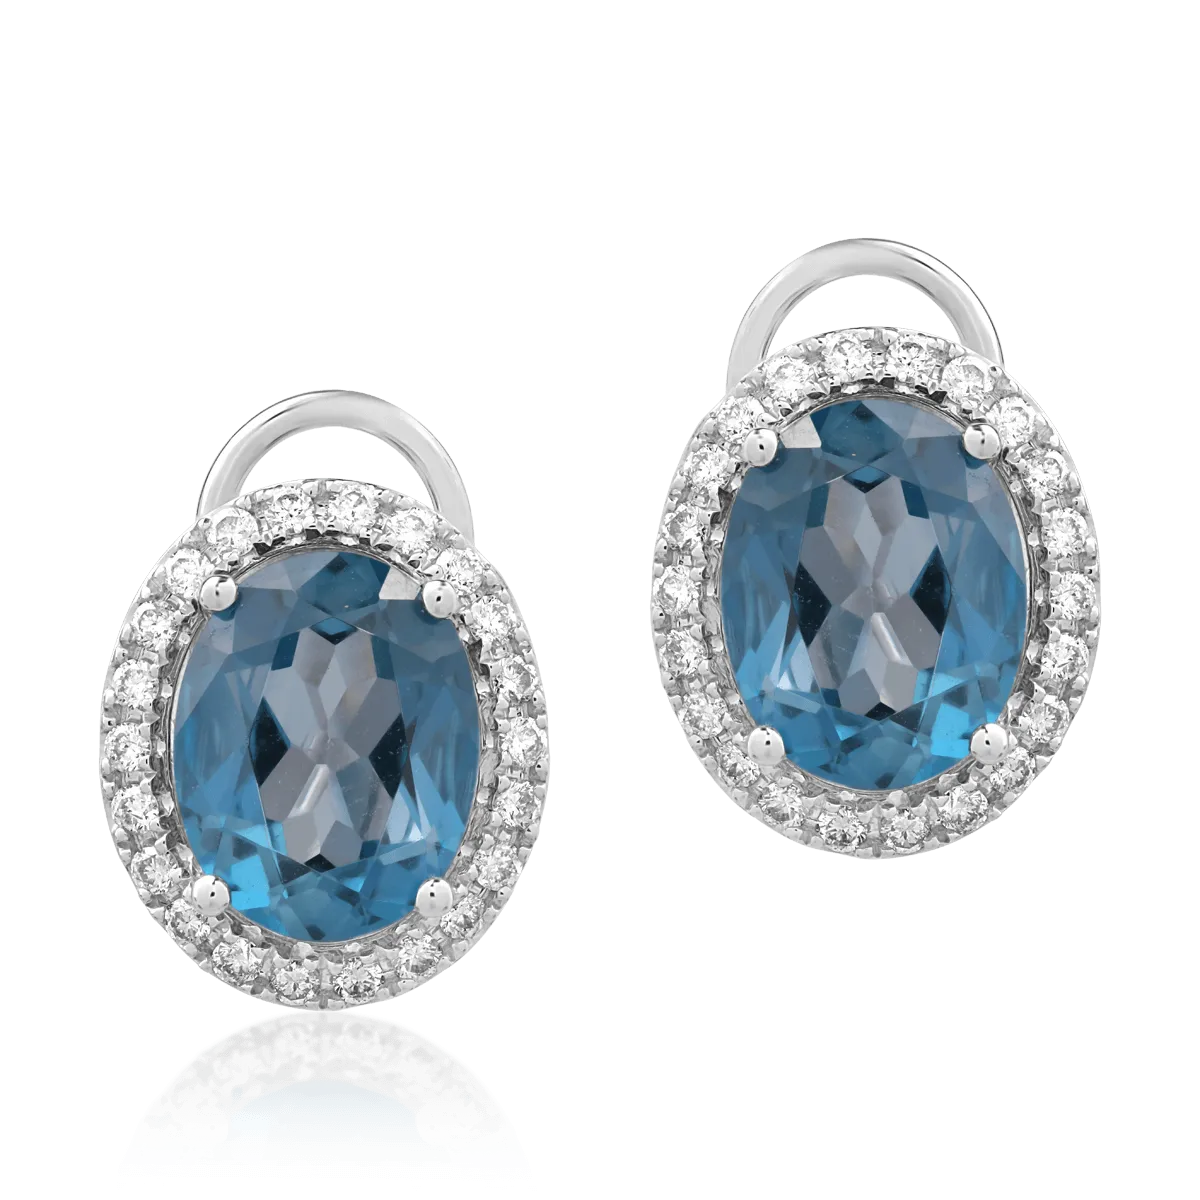 18K white gold earrings with 4.71ct London blue topaz and 0.31ct diamonds